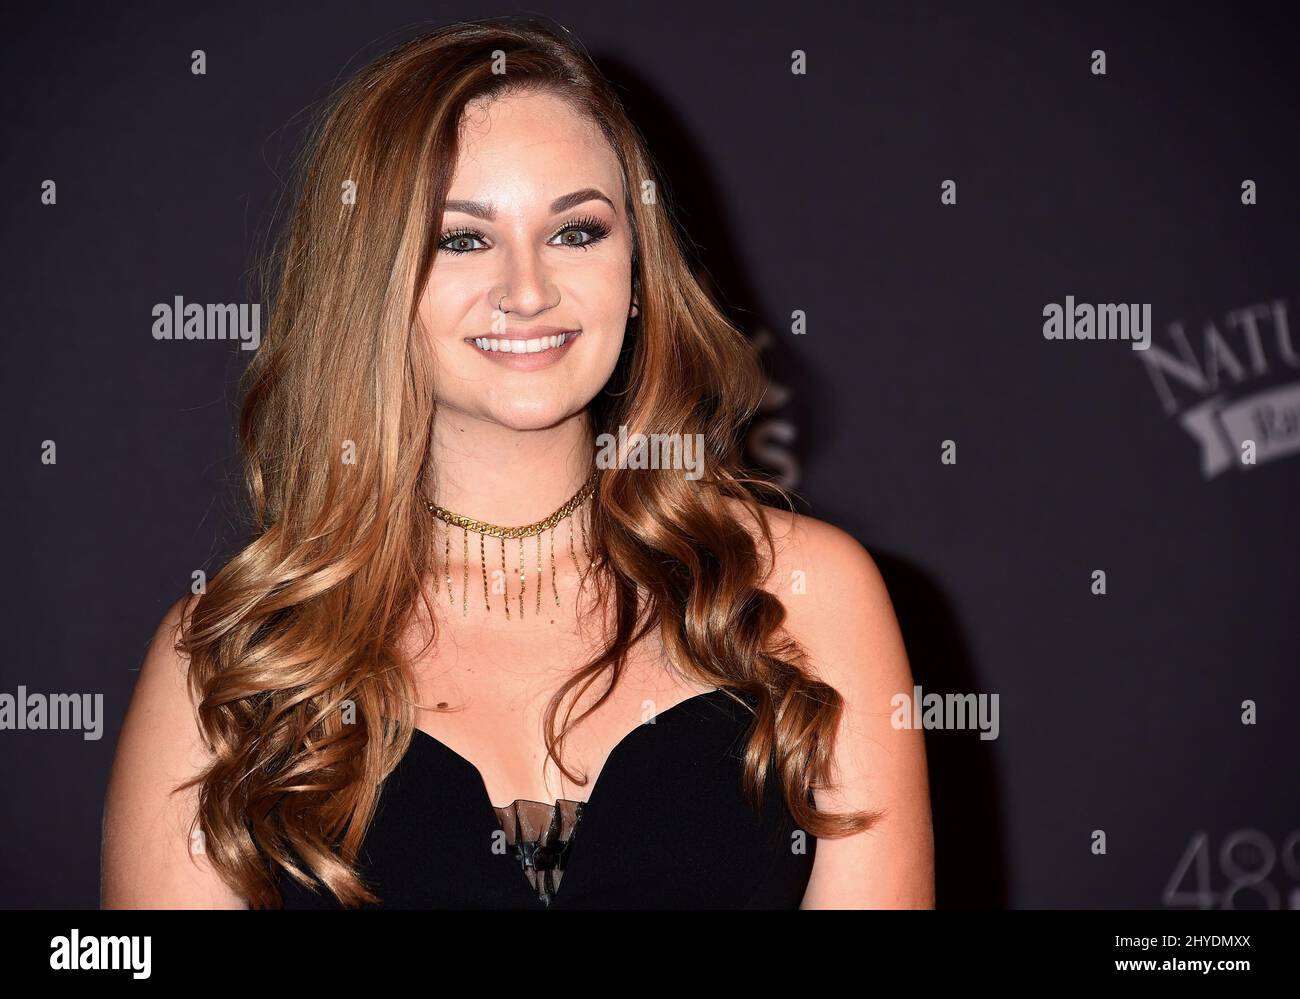 Hollyn attending at the 48th Annual GMA Dove Awards held at the Lipscomb University's Allen Arena in Los Angeles, USA Stock Photo